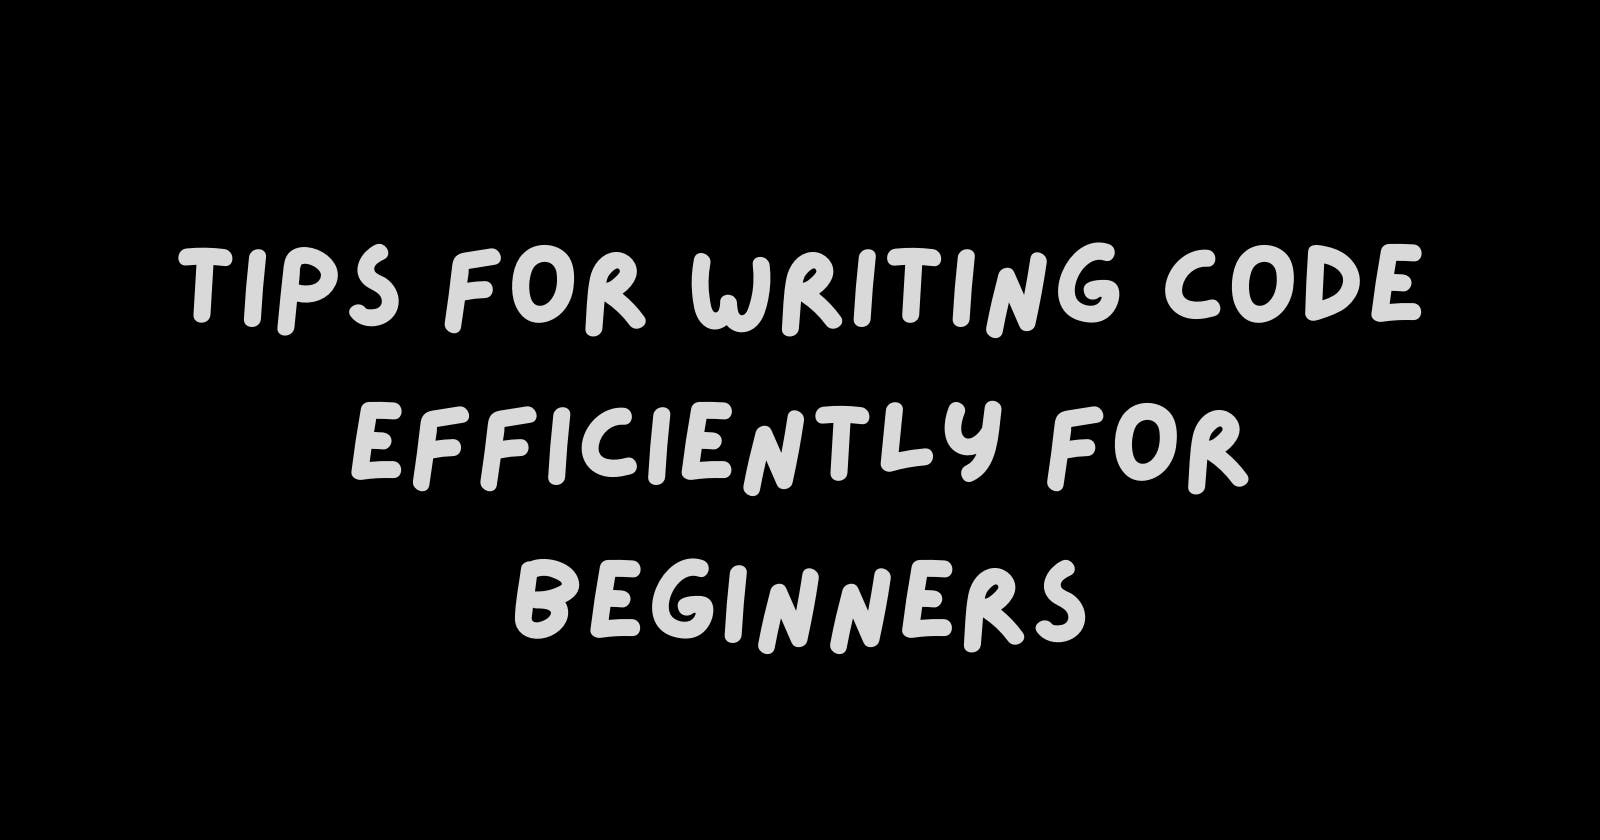 Tips for writing code efficiently for beginners